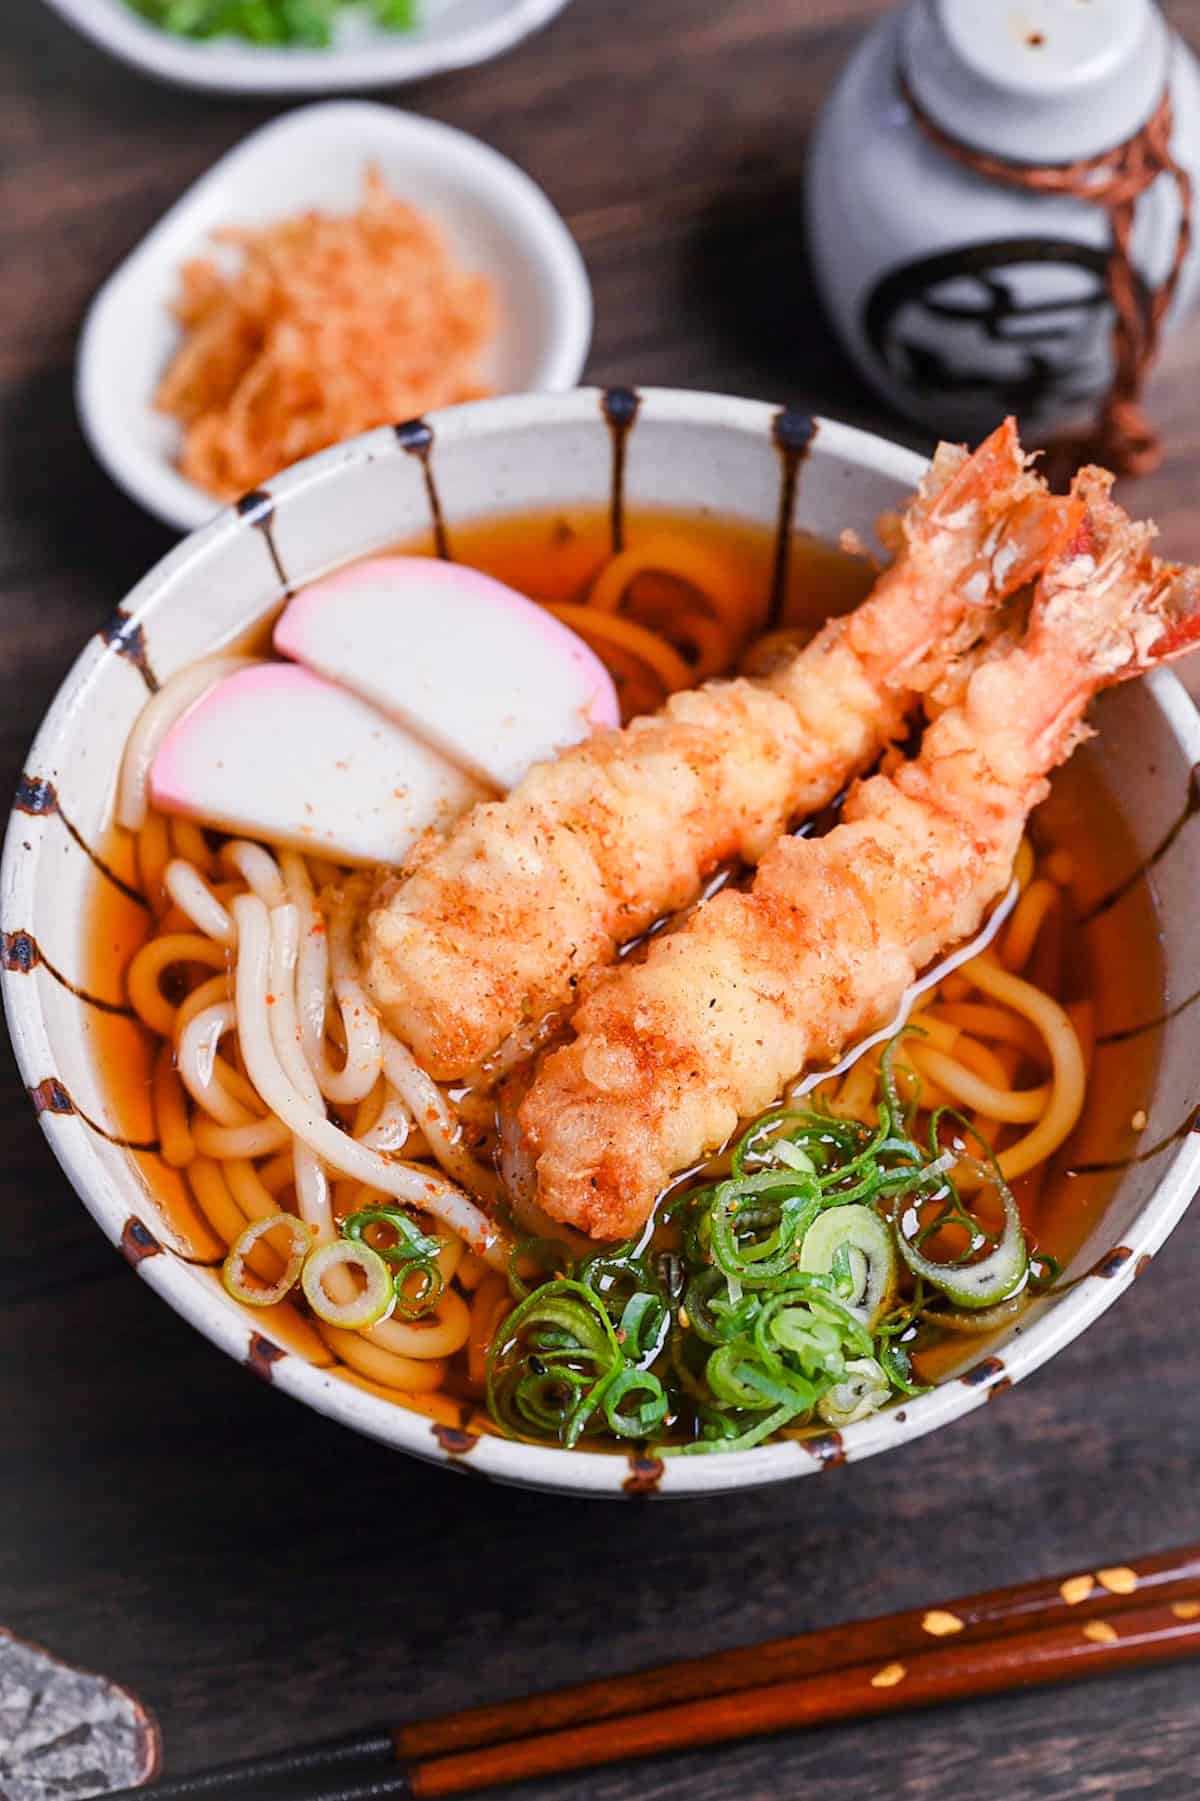 Ebiten Udon - Homemade udon noodle soup in a stripy bowl topped with kamaboko, green onion and tempura shrimp